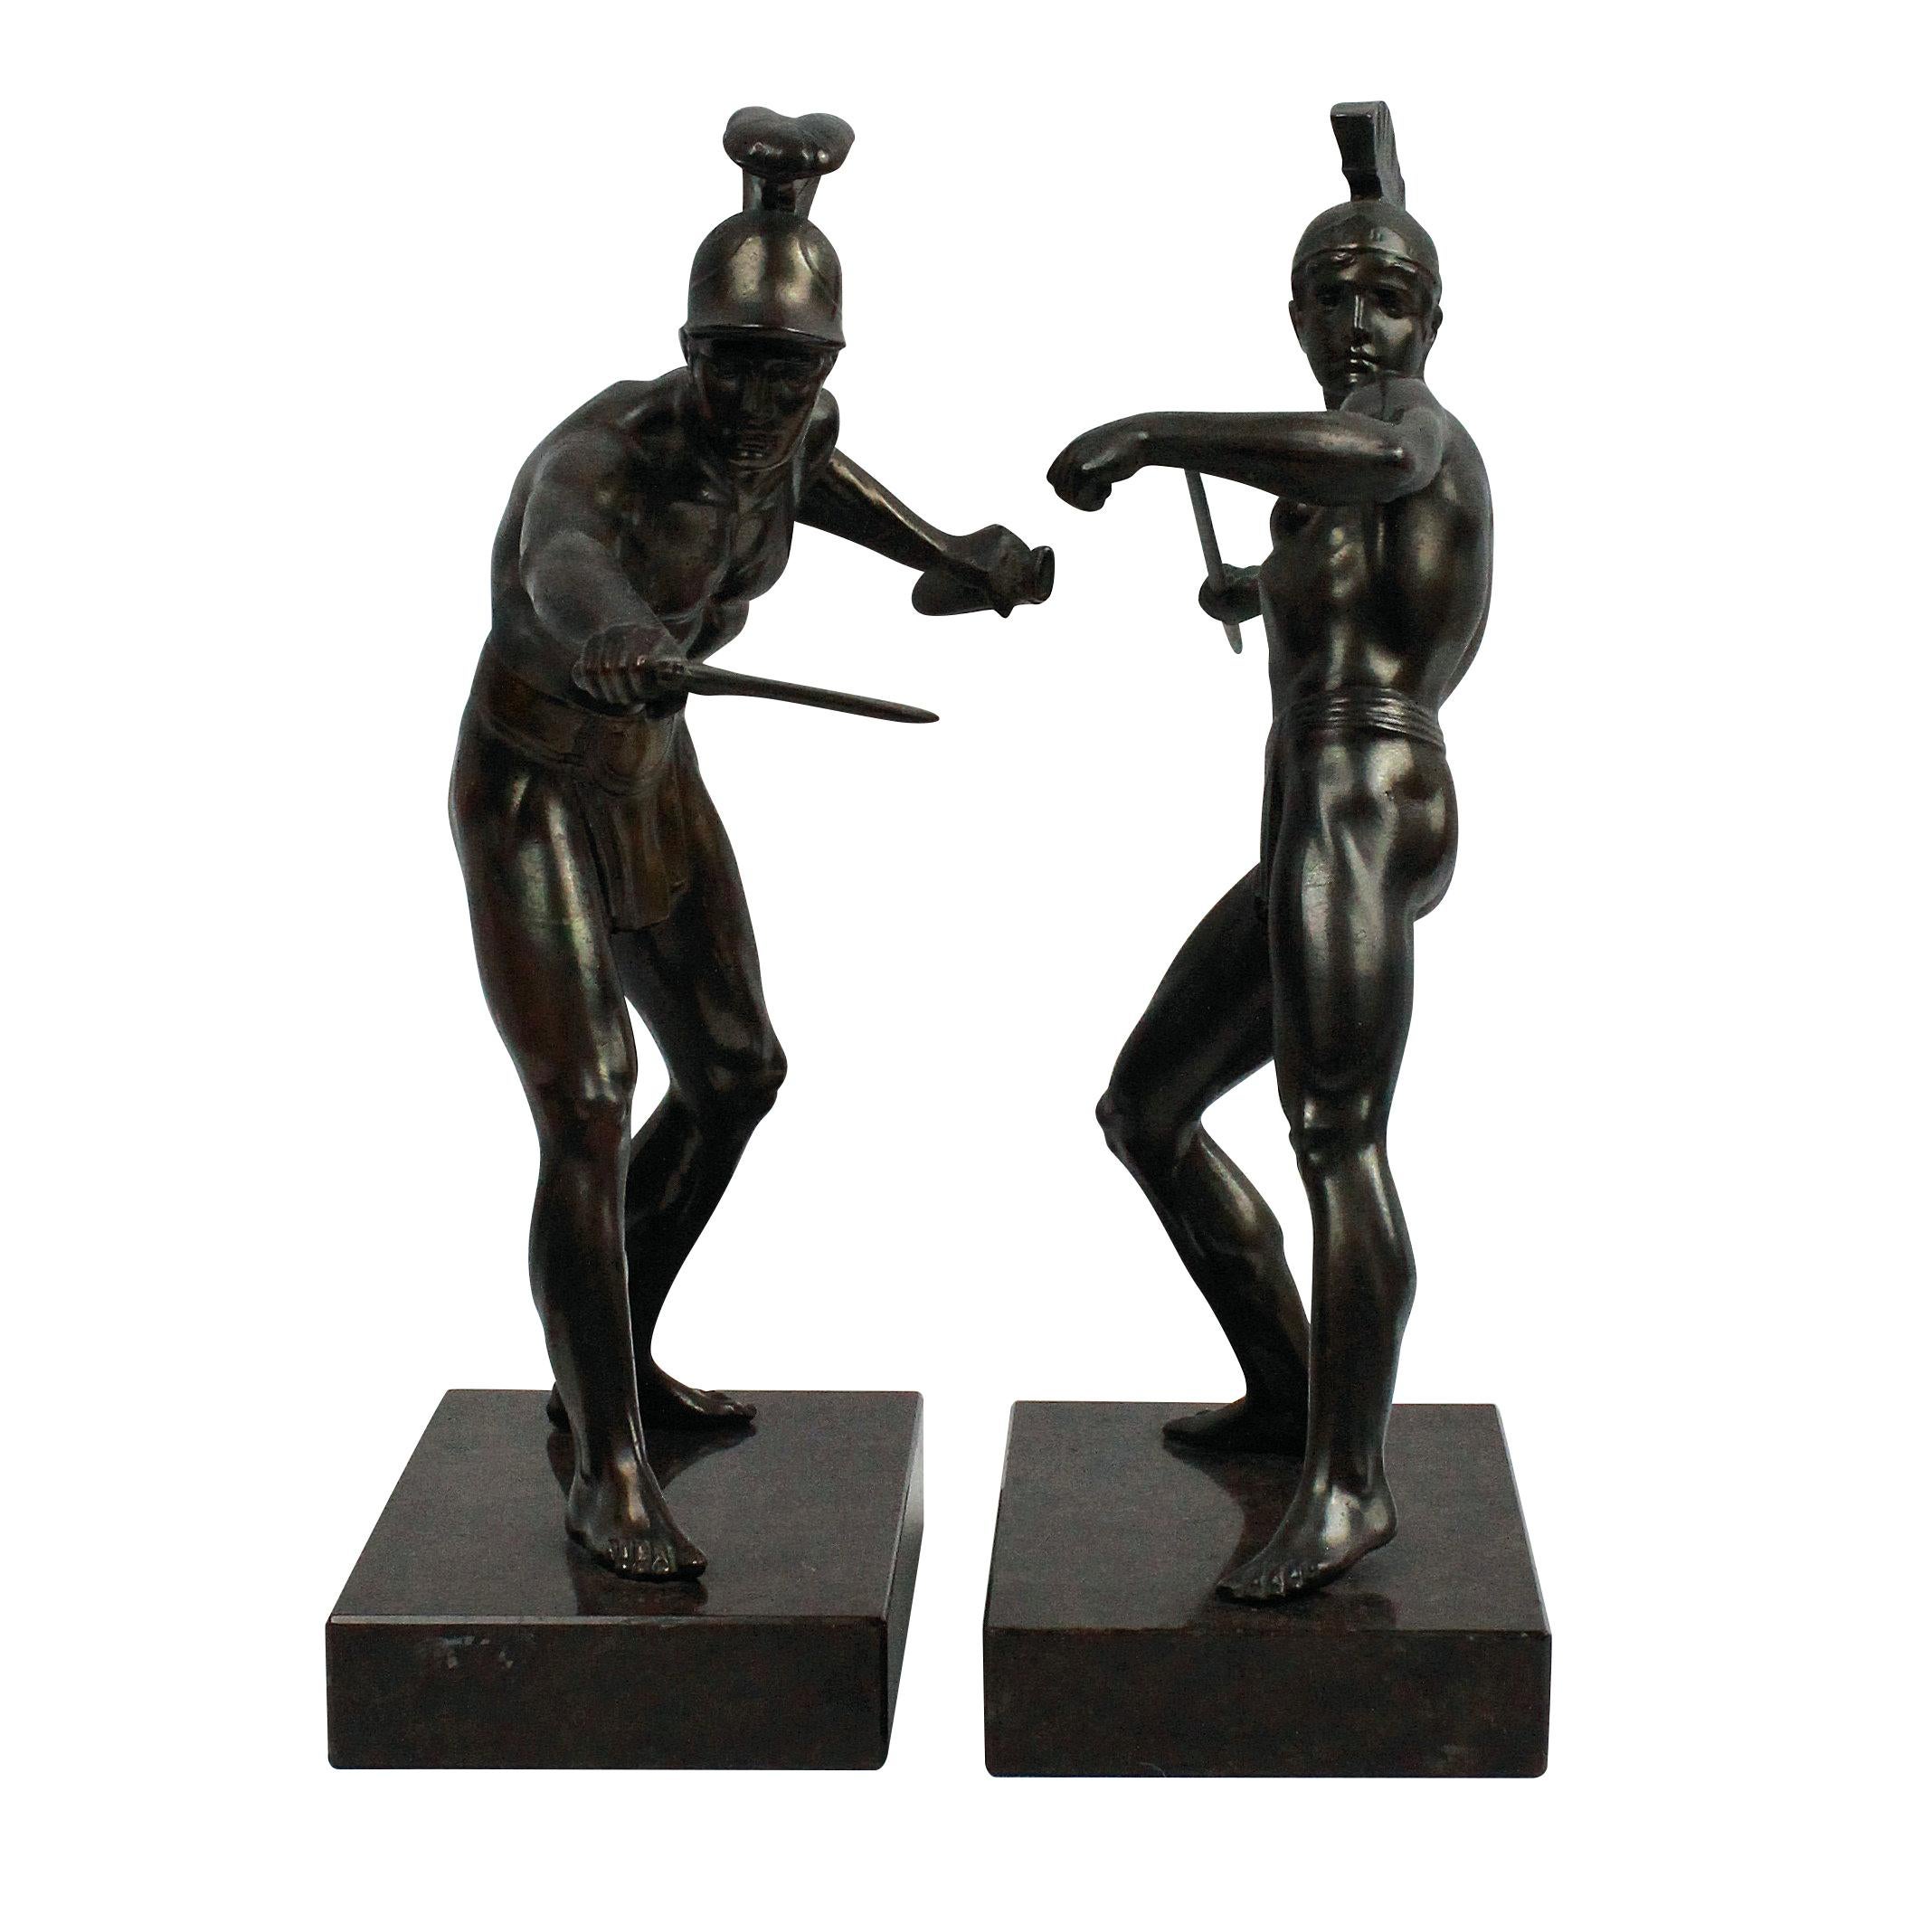 A pair of English bronzes of ancient Greek warriors on dark brown polished marble bases, one holding a spear and the other a sword.